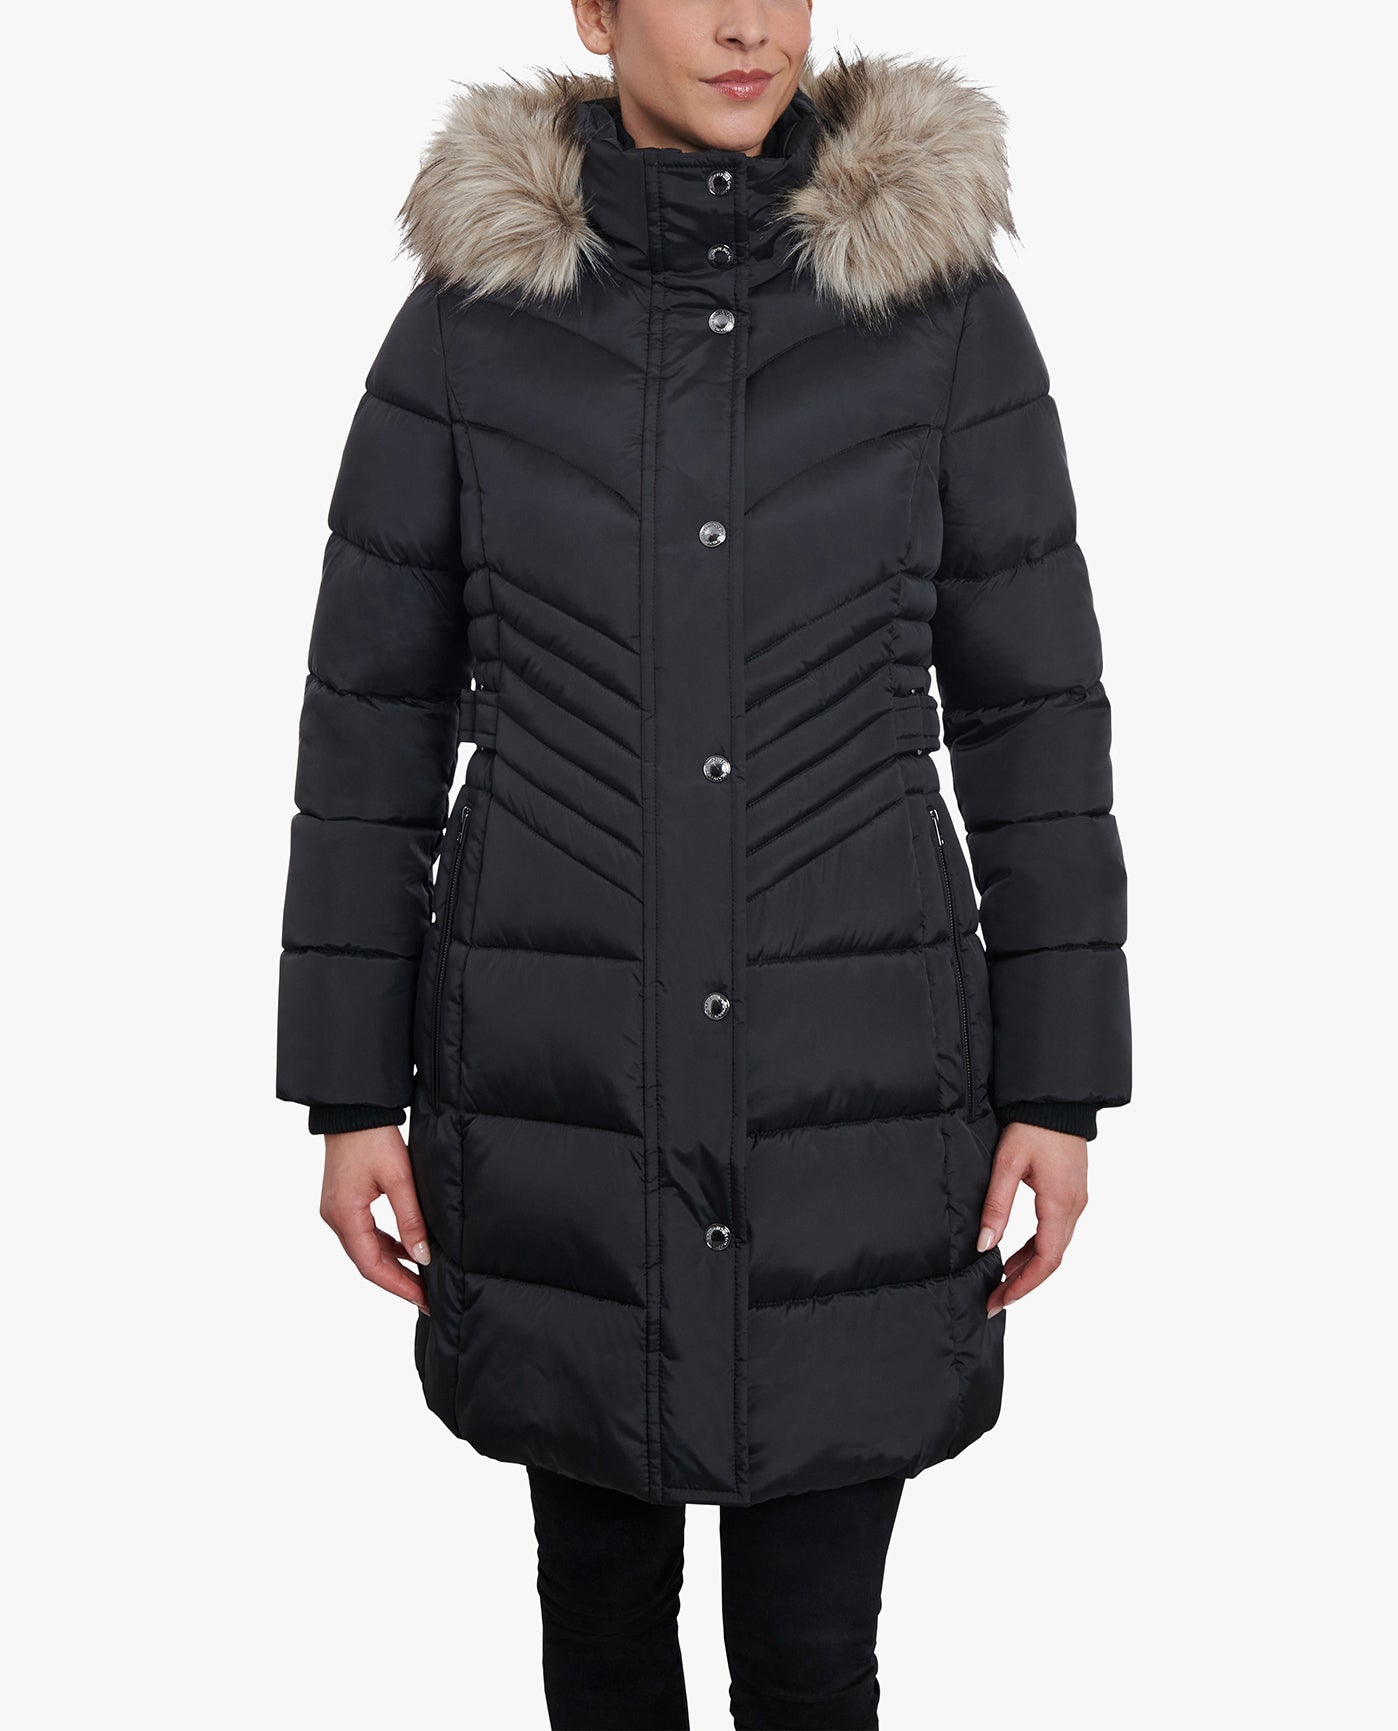 FRONT VIEW OF PLUS SIZE ZIP-FRONT LONG LENGTH PUFFER JACKET WITH ZIP-OFF FUR TRIM HOOD | BLACK